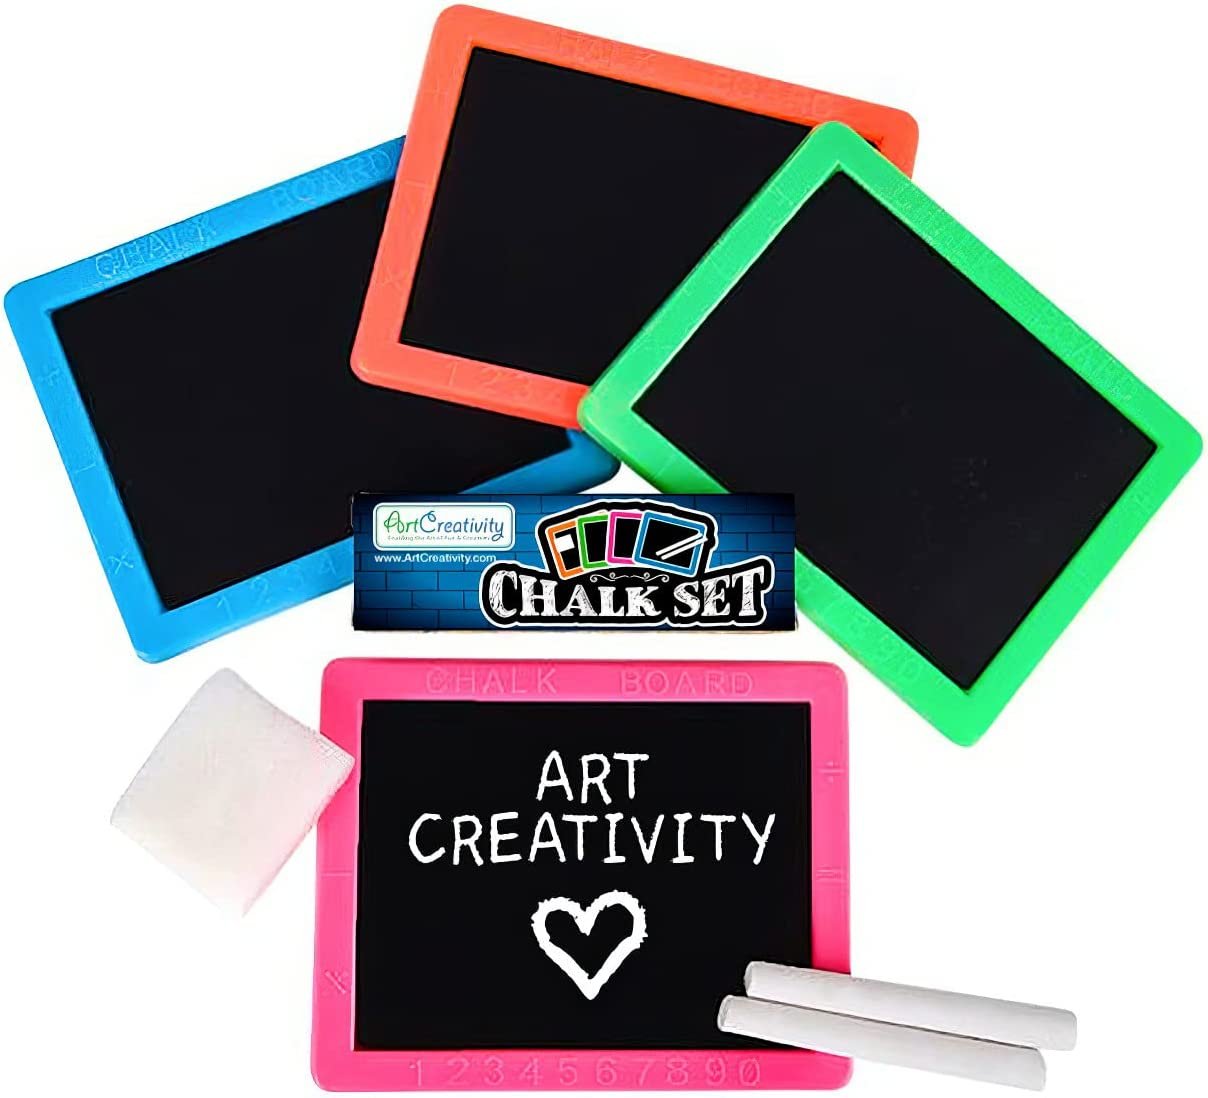 Neon Chalkboard Set for Kids - 12 Kits - 1 Mini Chalk Board, 2 Chalk Sticks, and 1 Eraser Per Kit - Art Birthday Party Favors for Boys and Girls, Unique Stationery Goodie Bag Fillers